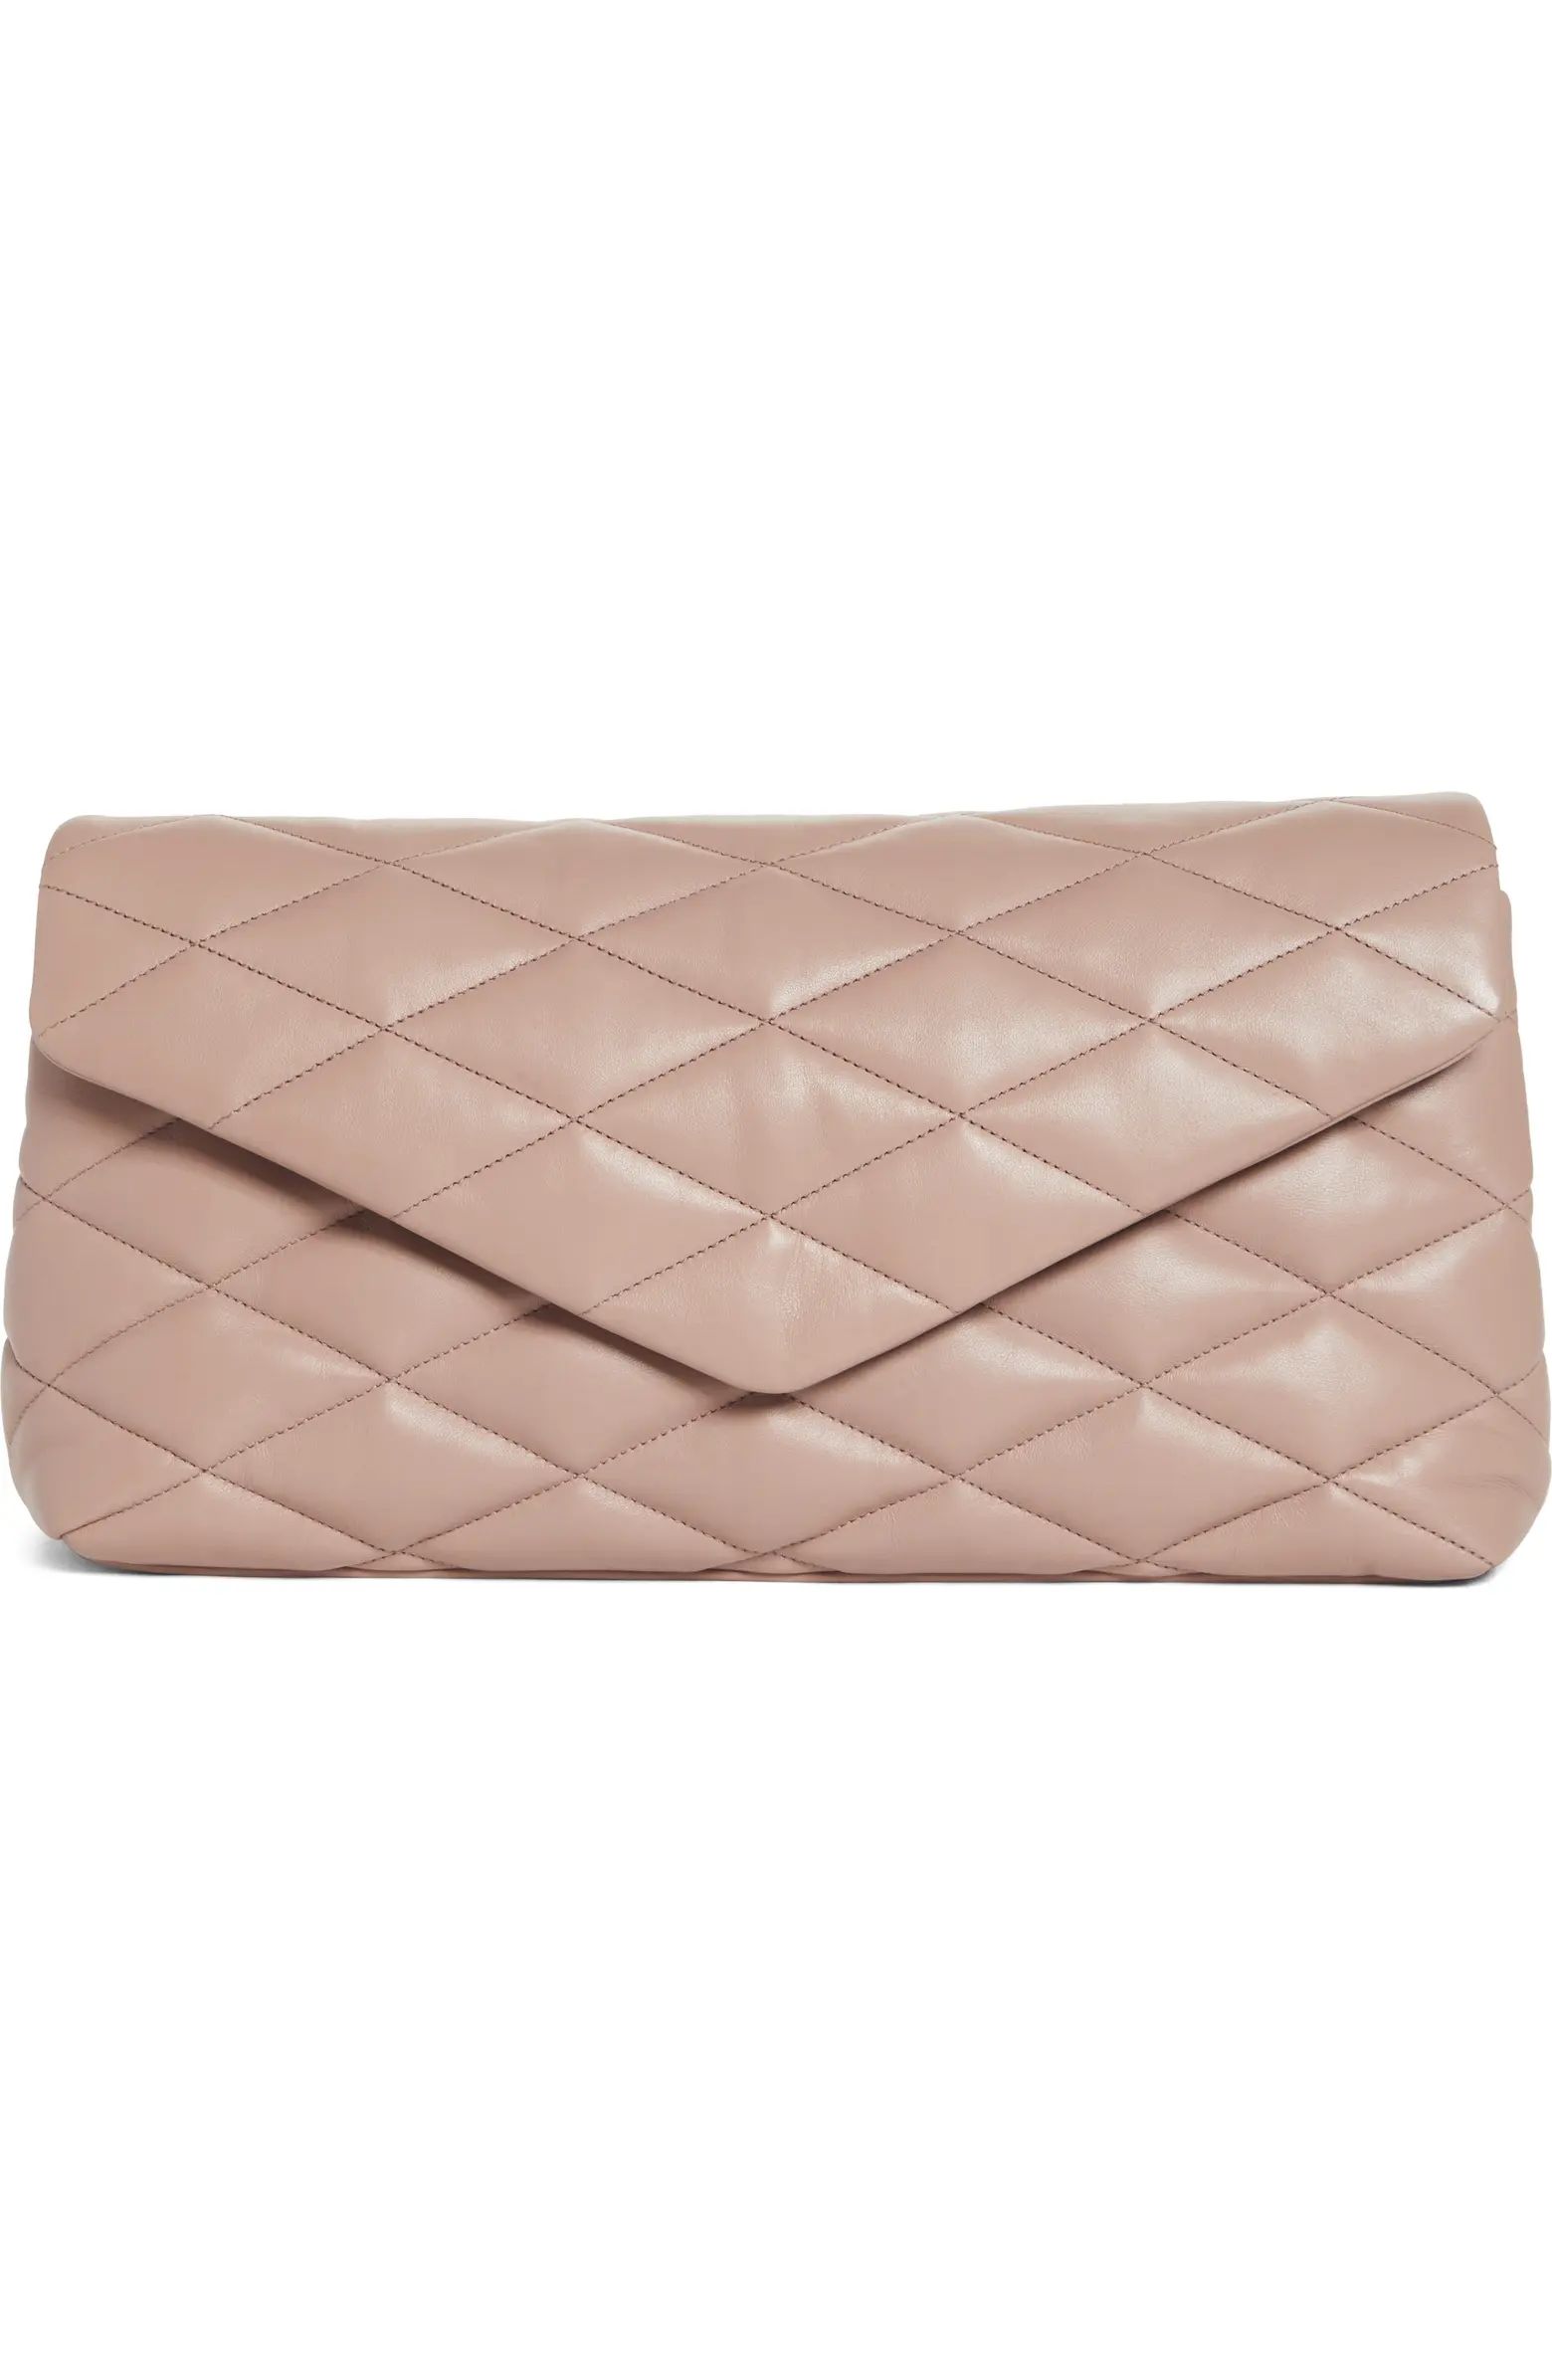 Sade Leather Puffer Clutch | Nordstrom